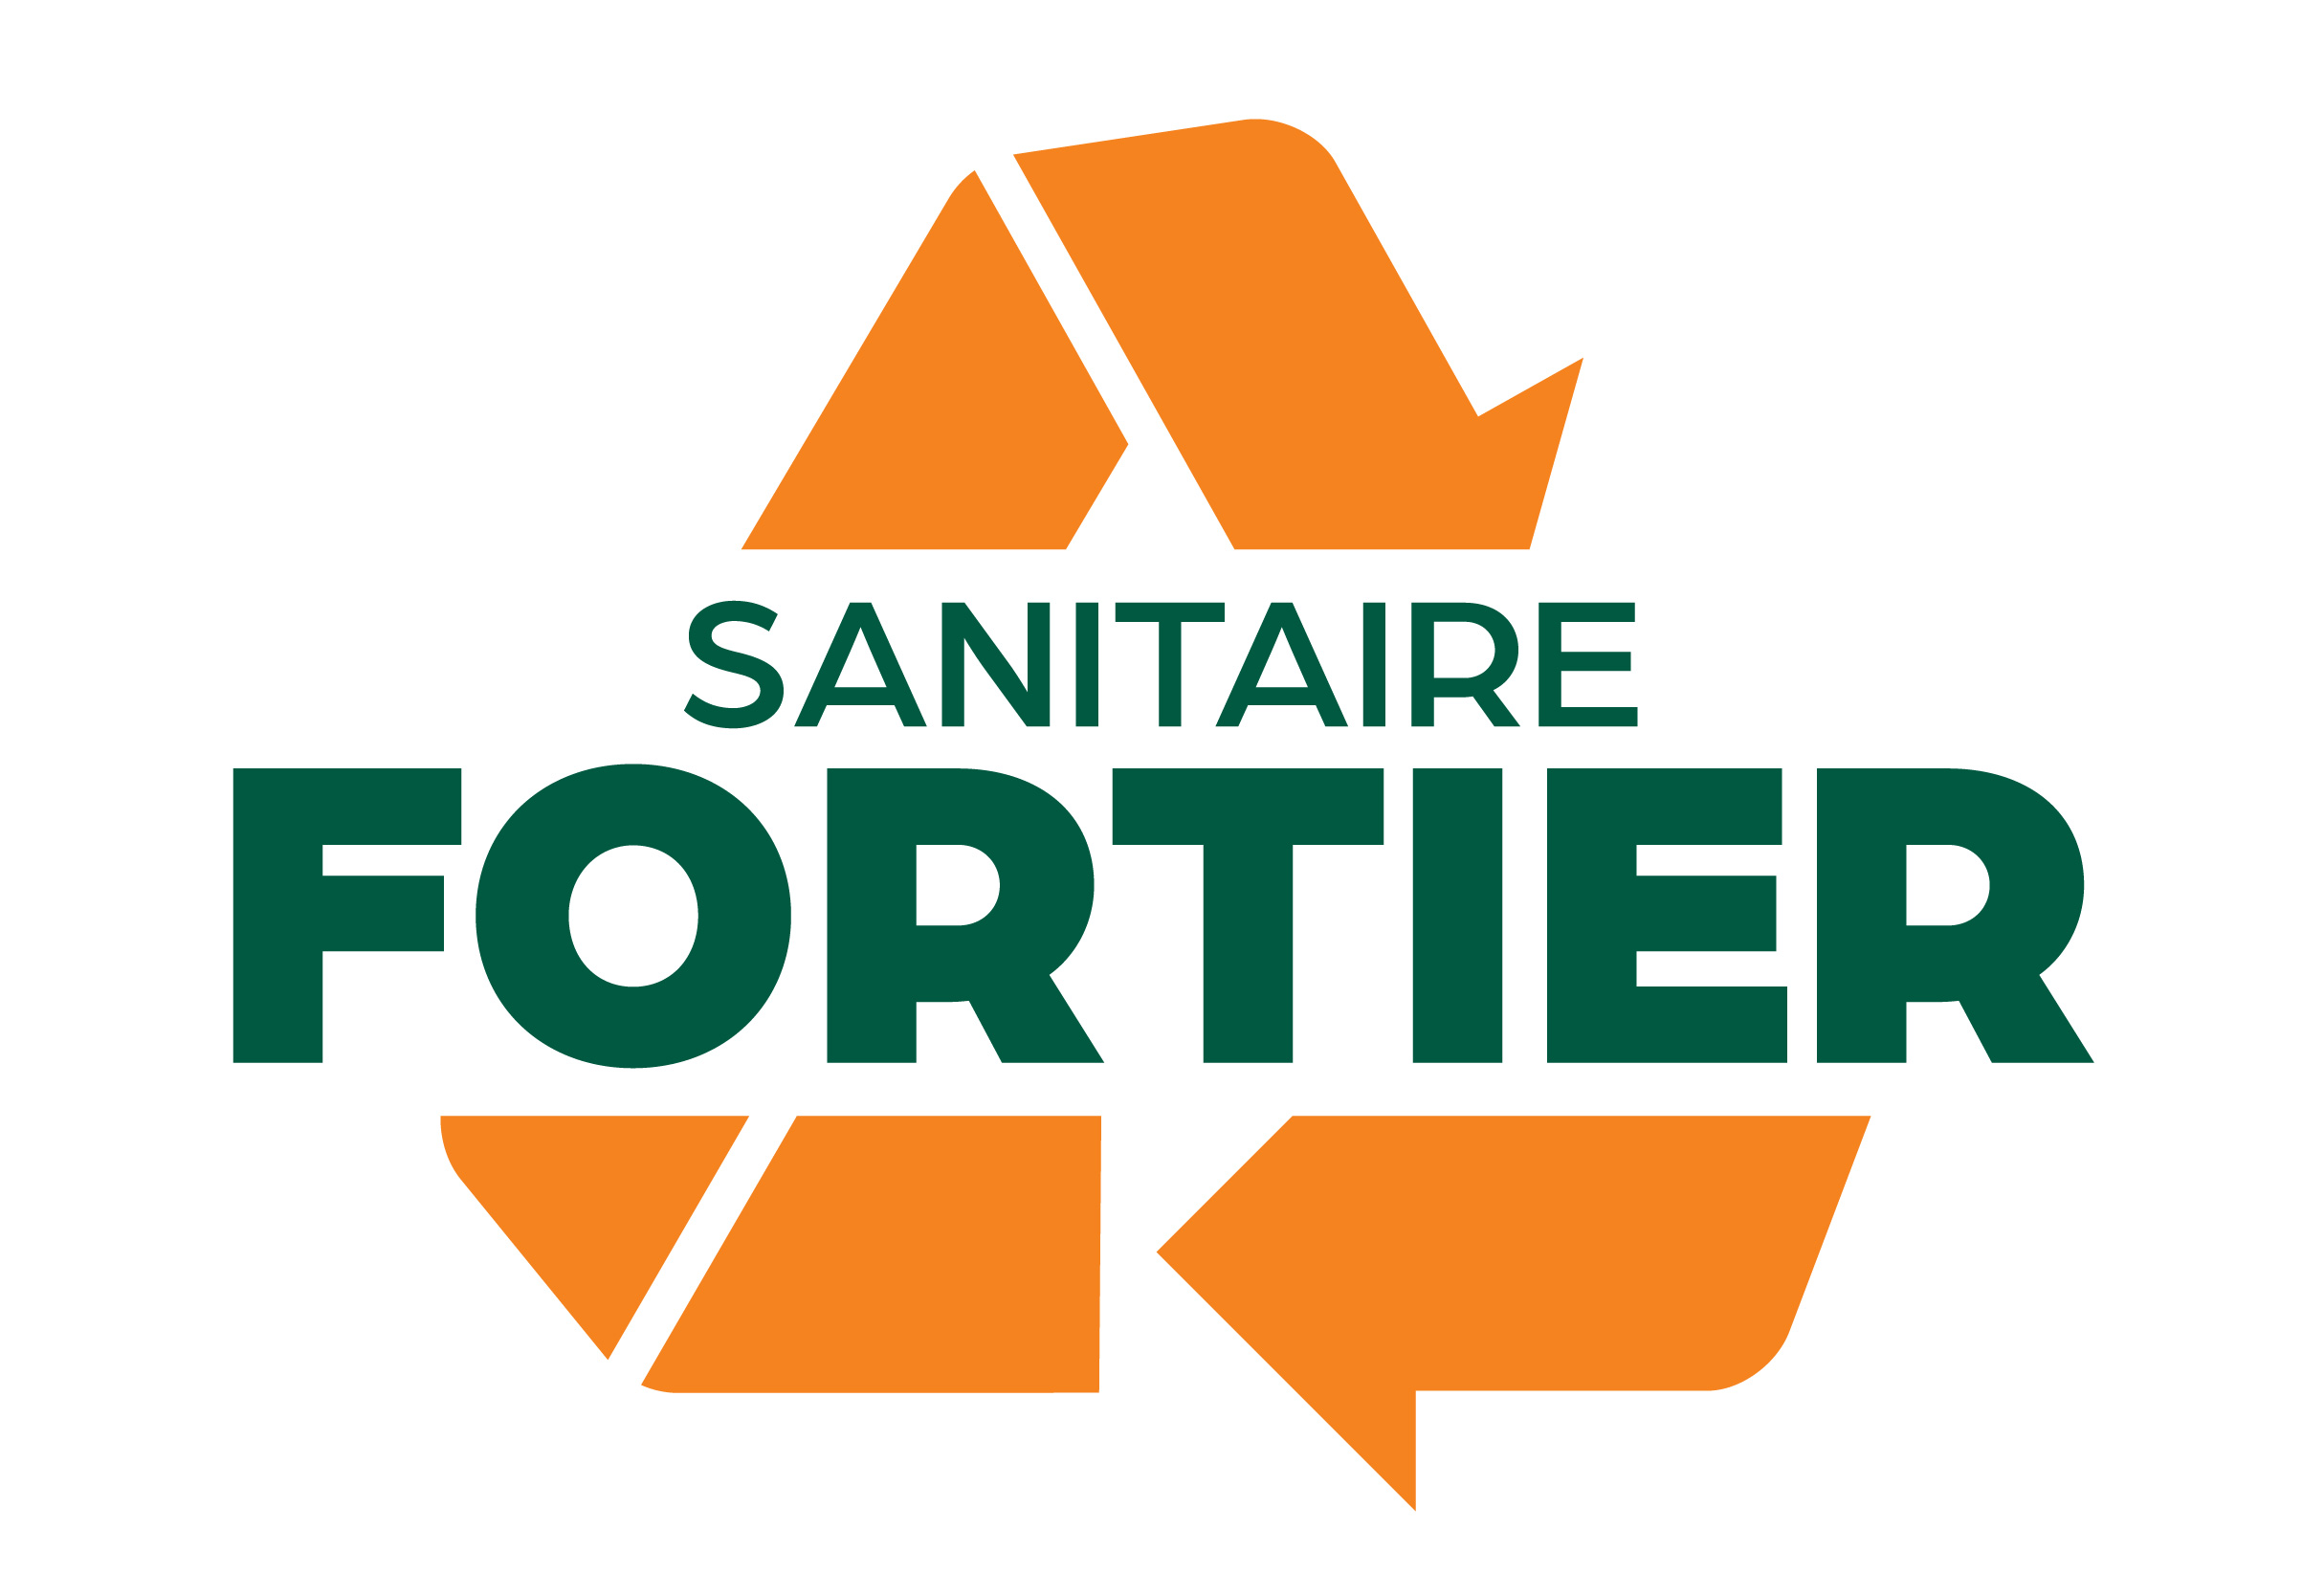 Sanitaire Fortier